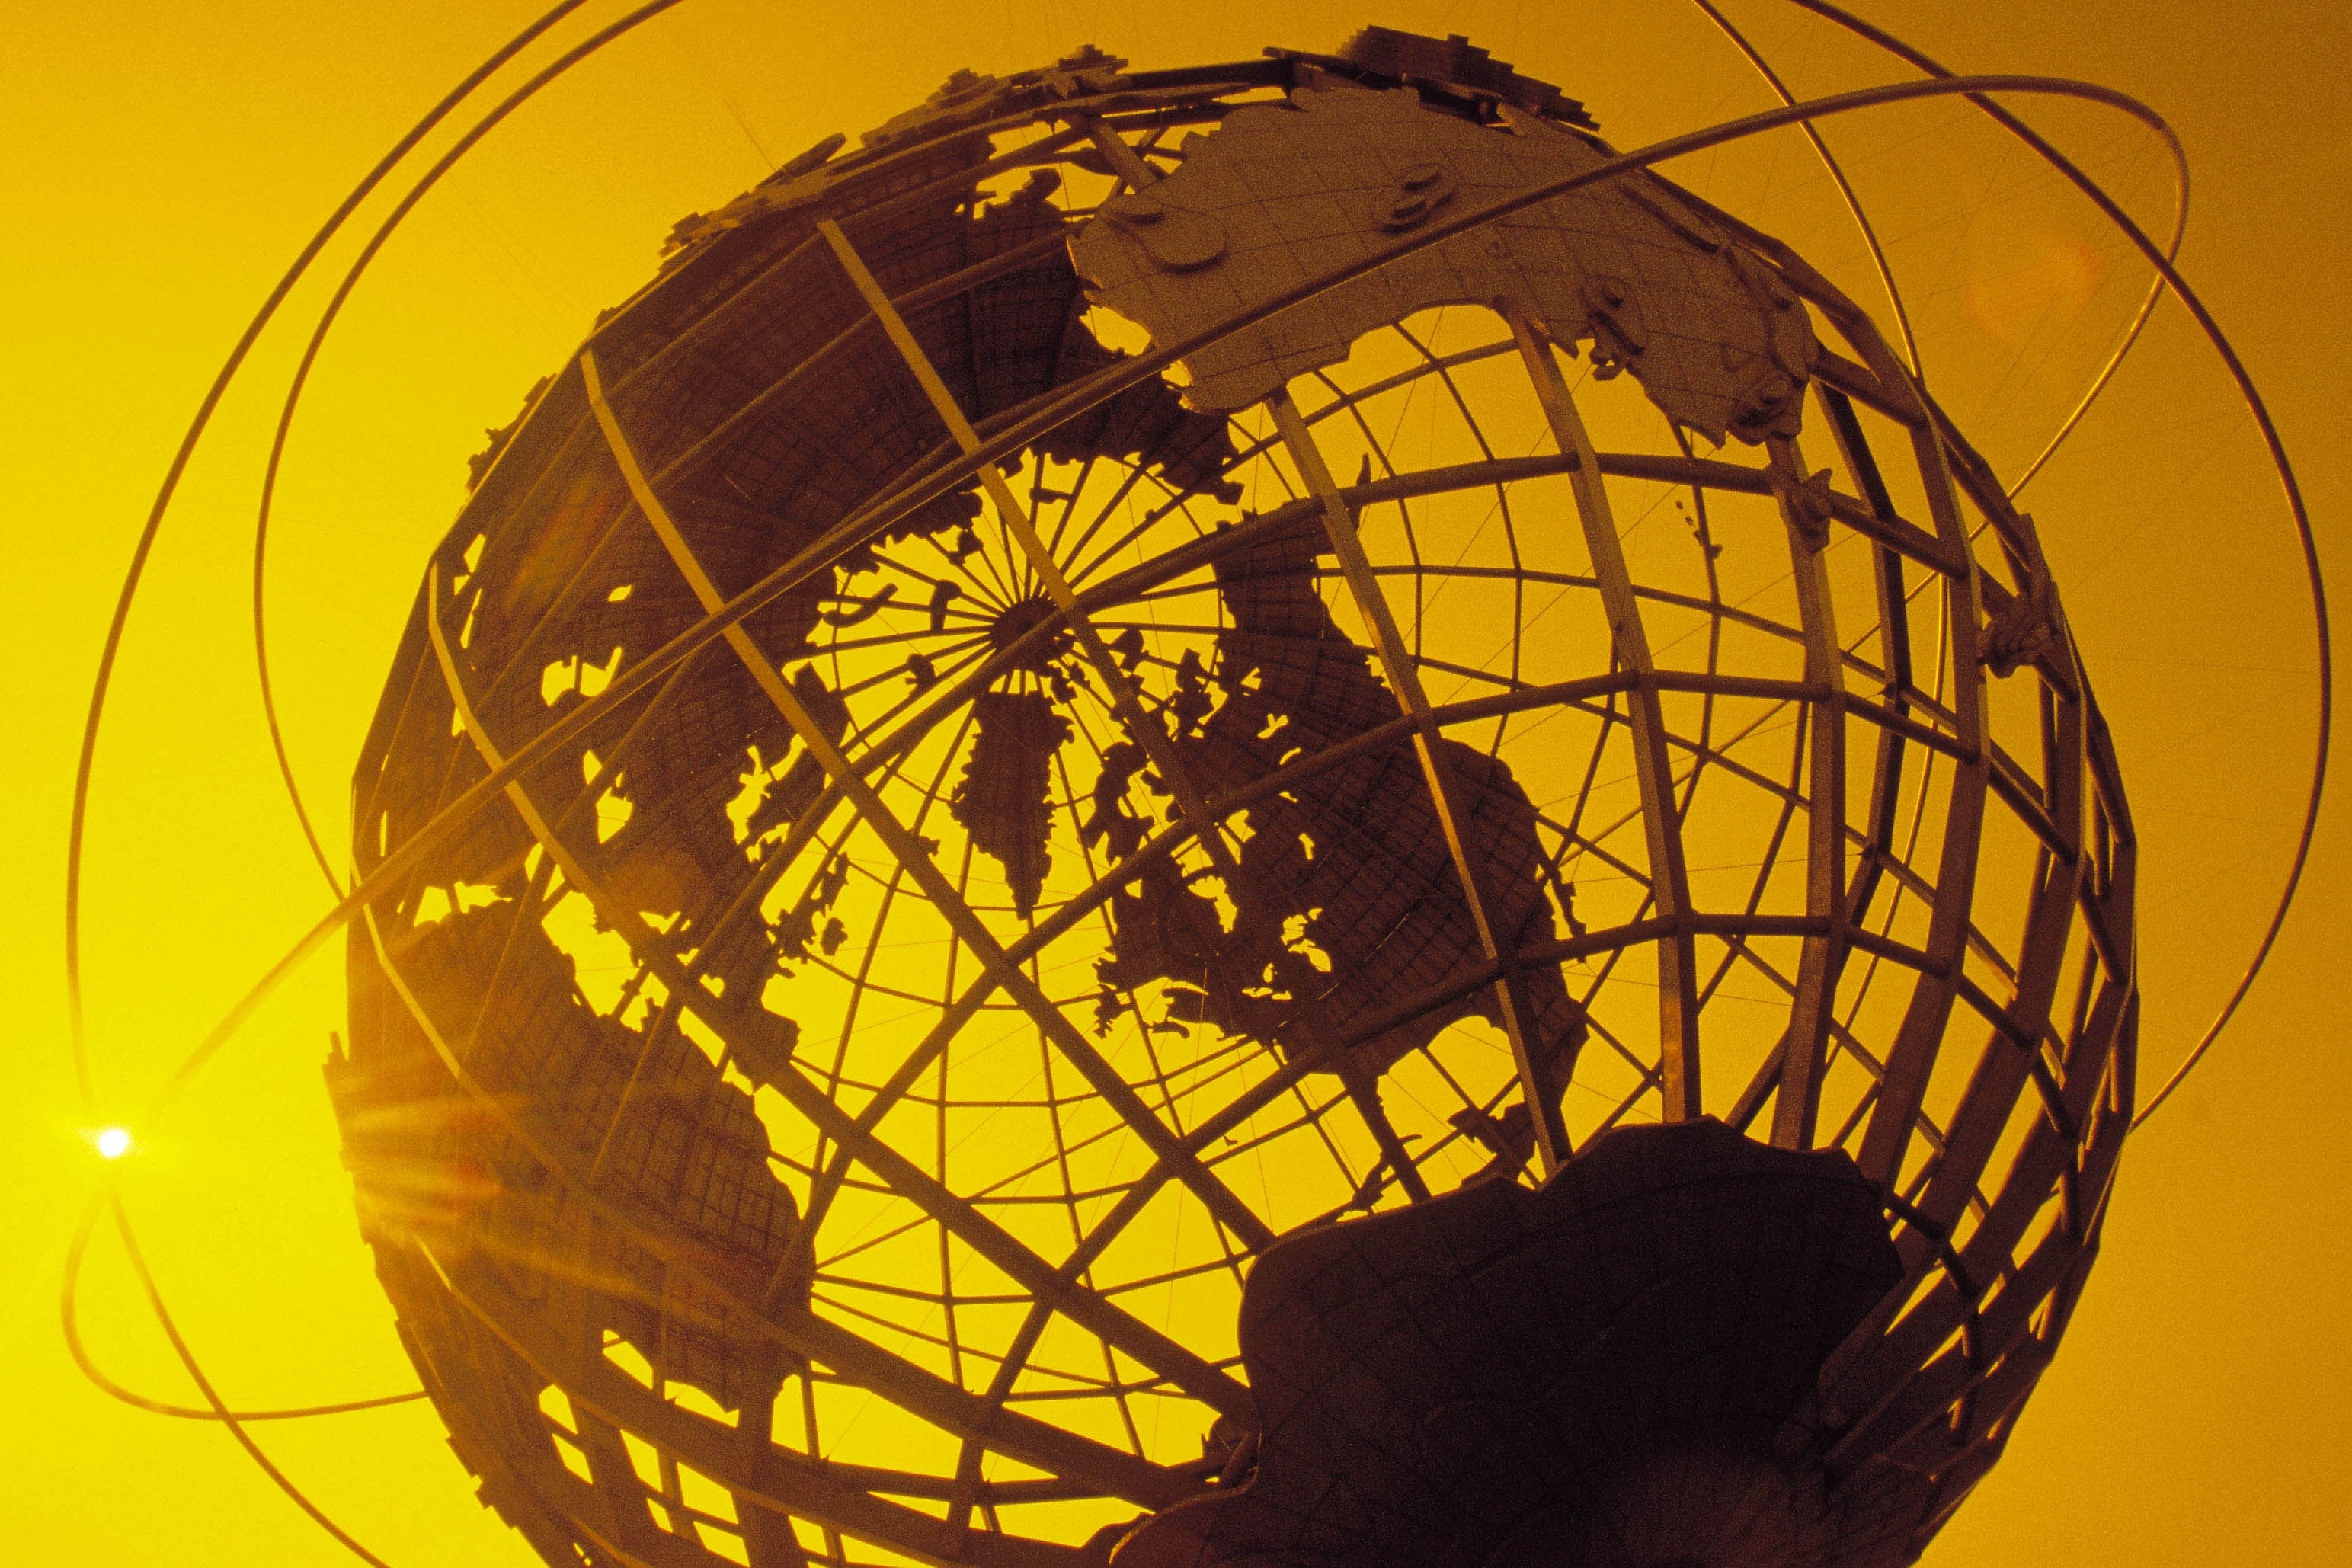 Sculpture of the Globe during the sunset